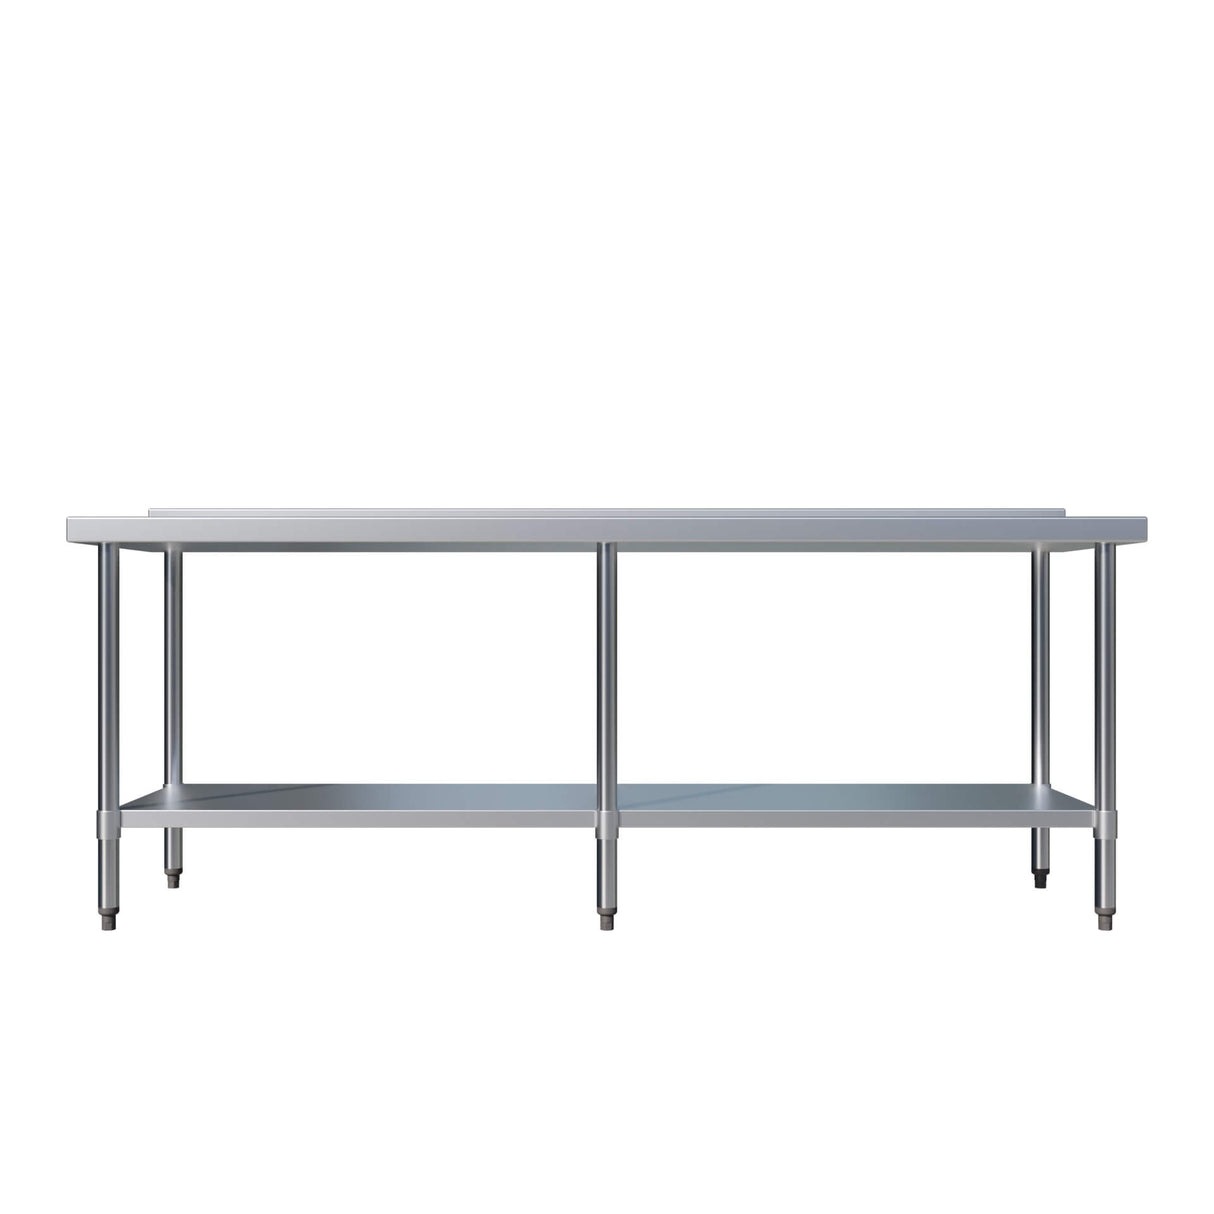 Empire Stainless Steel Wall Prep Table 2100mm Wide with Upstand - SSWT-210 Stainless Steel Wall Tables Empire   